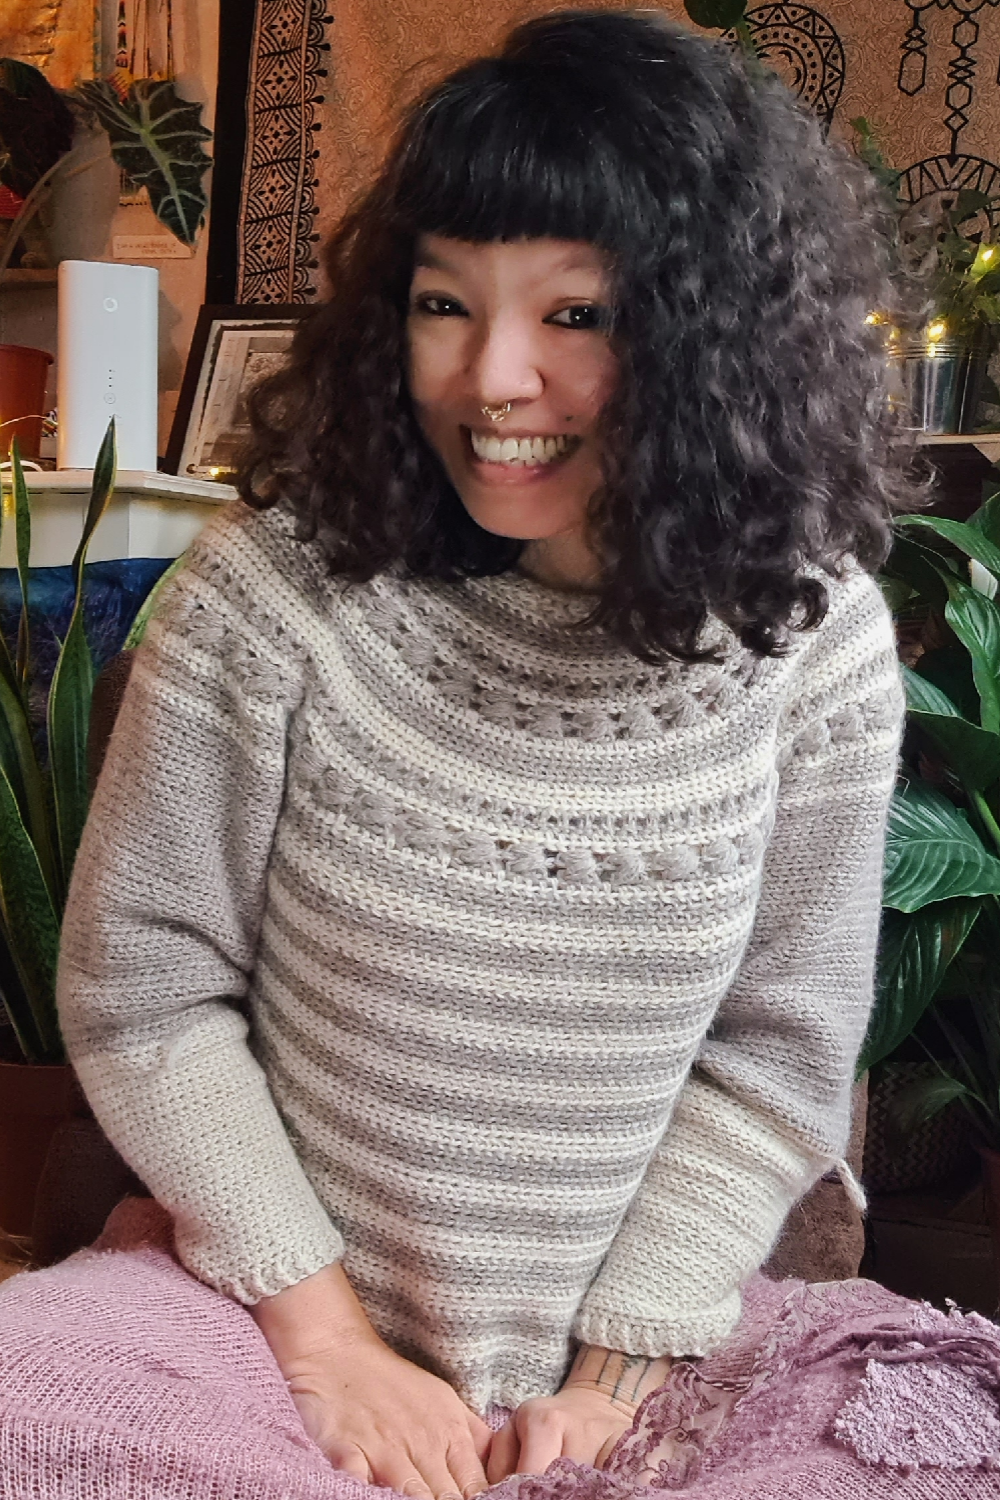 Is it Easier to Knit or Crochet a Sweater?